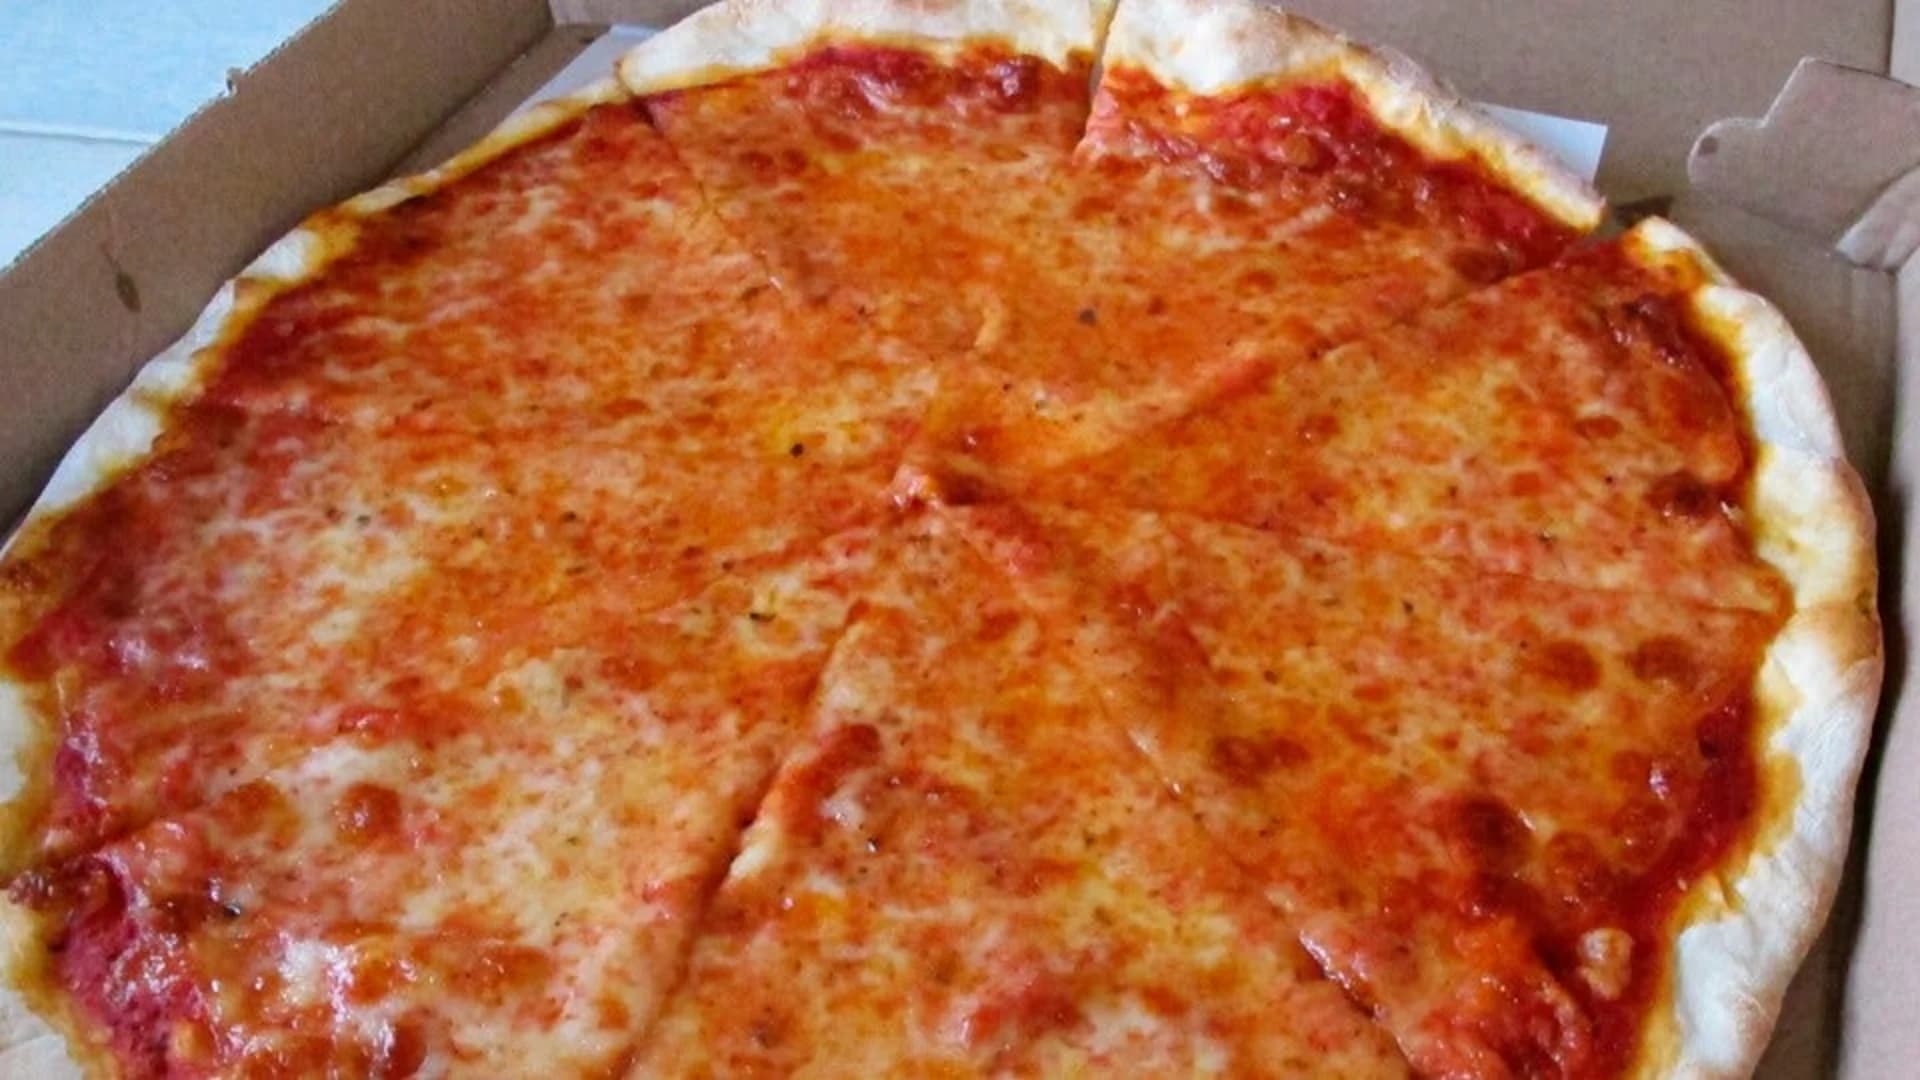 News 12 Poll: Who has the best pizza?